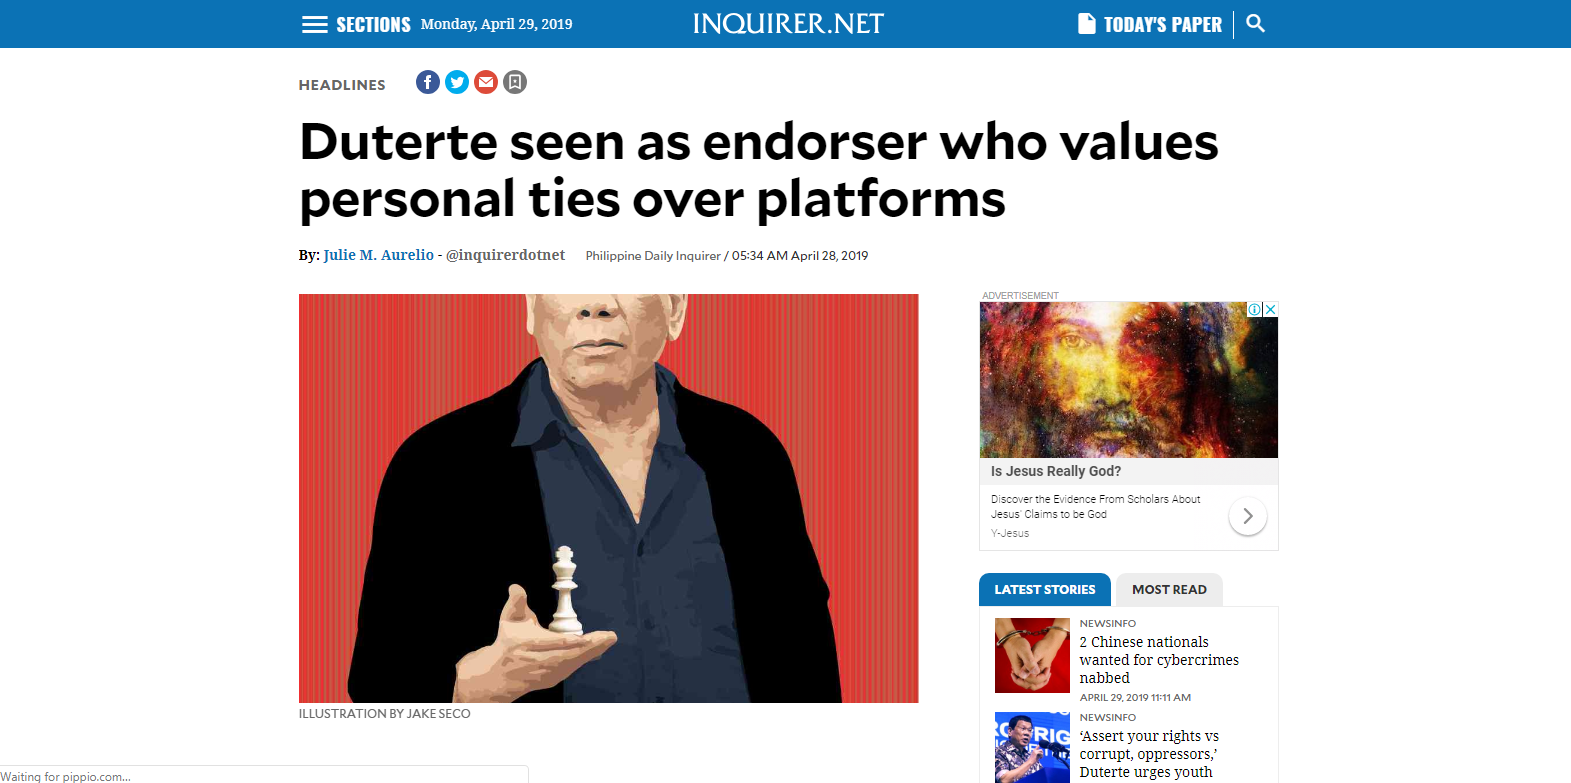 Duterte seen as endorser who values personal ties over platforms